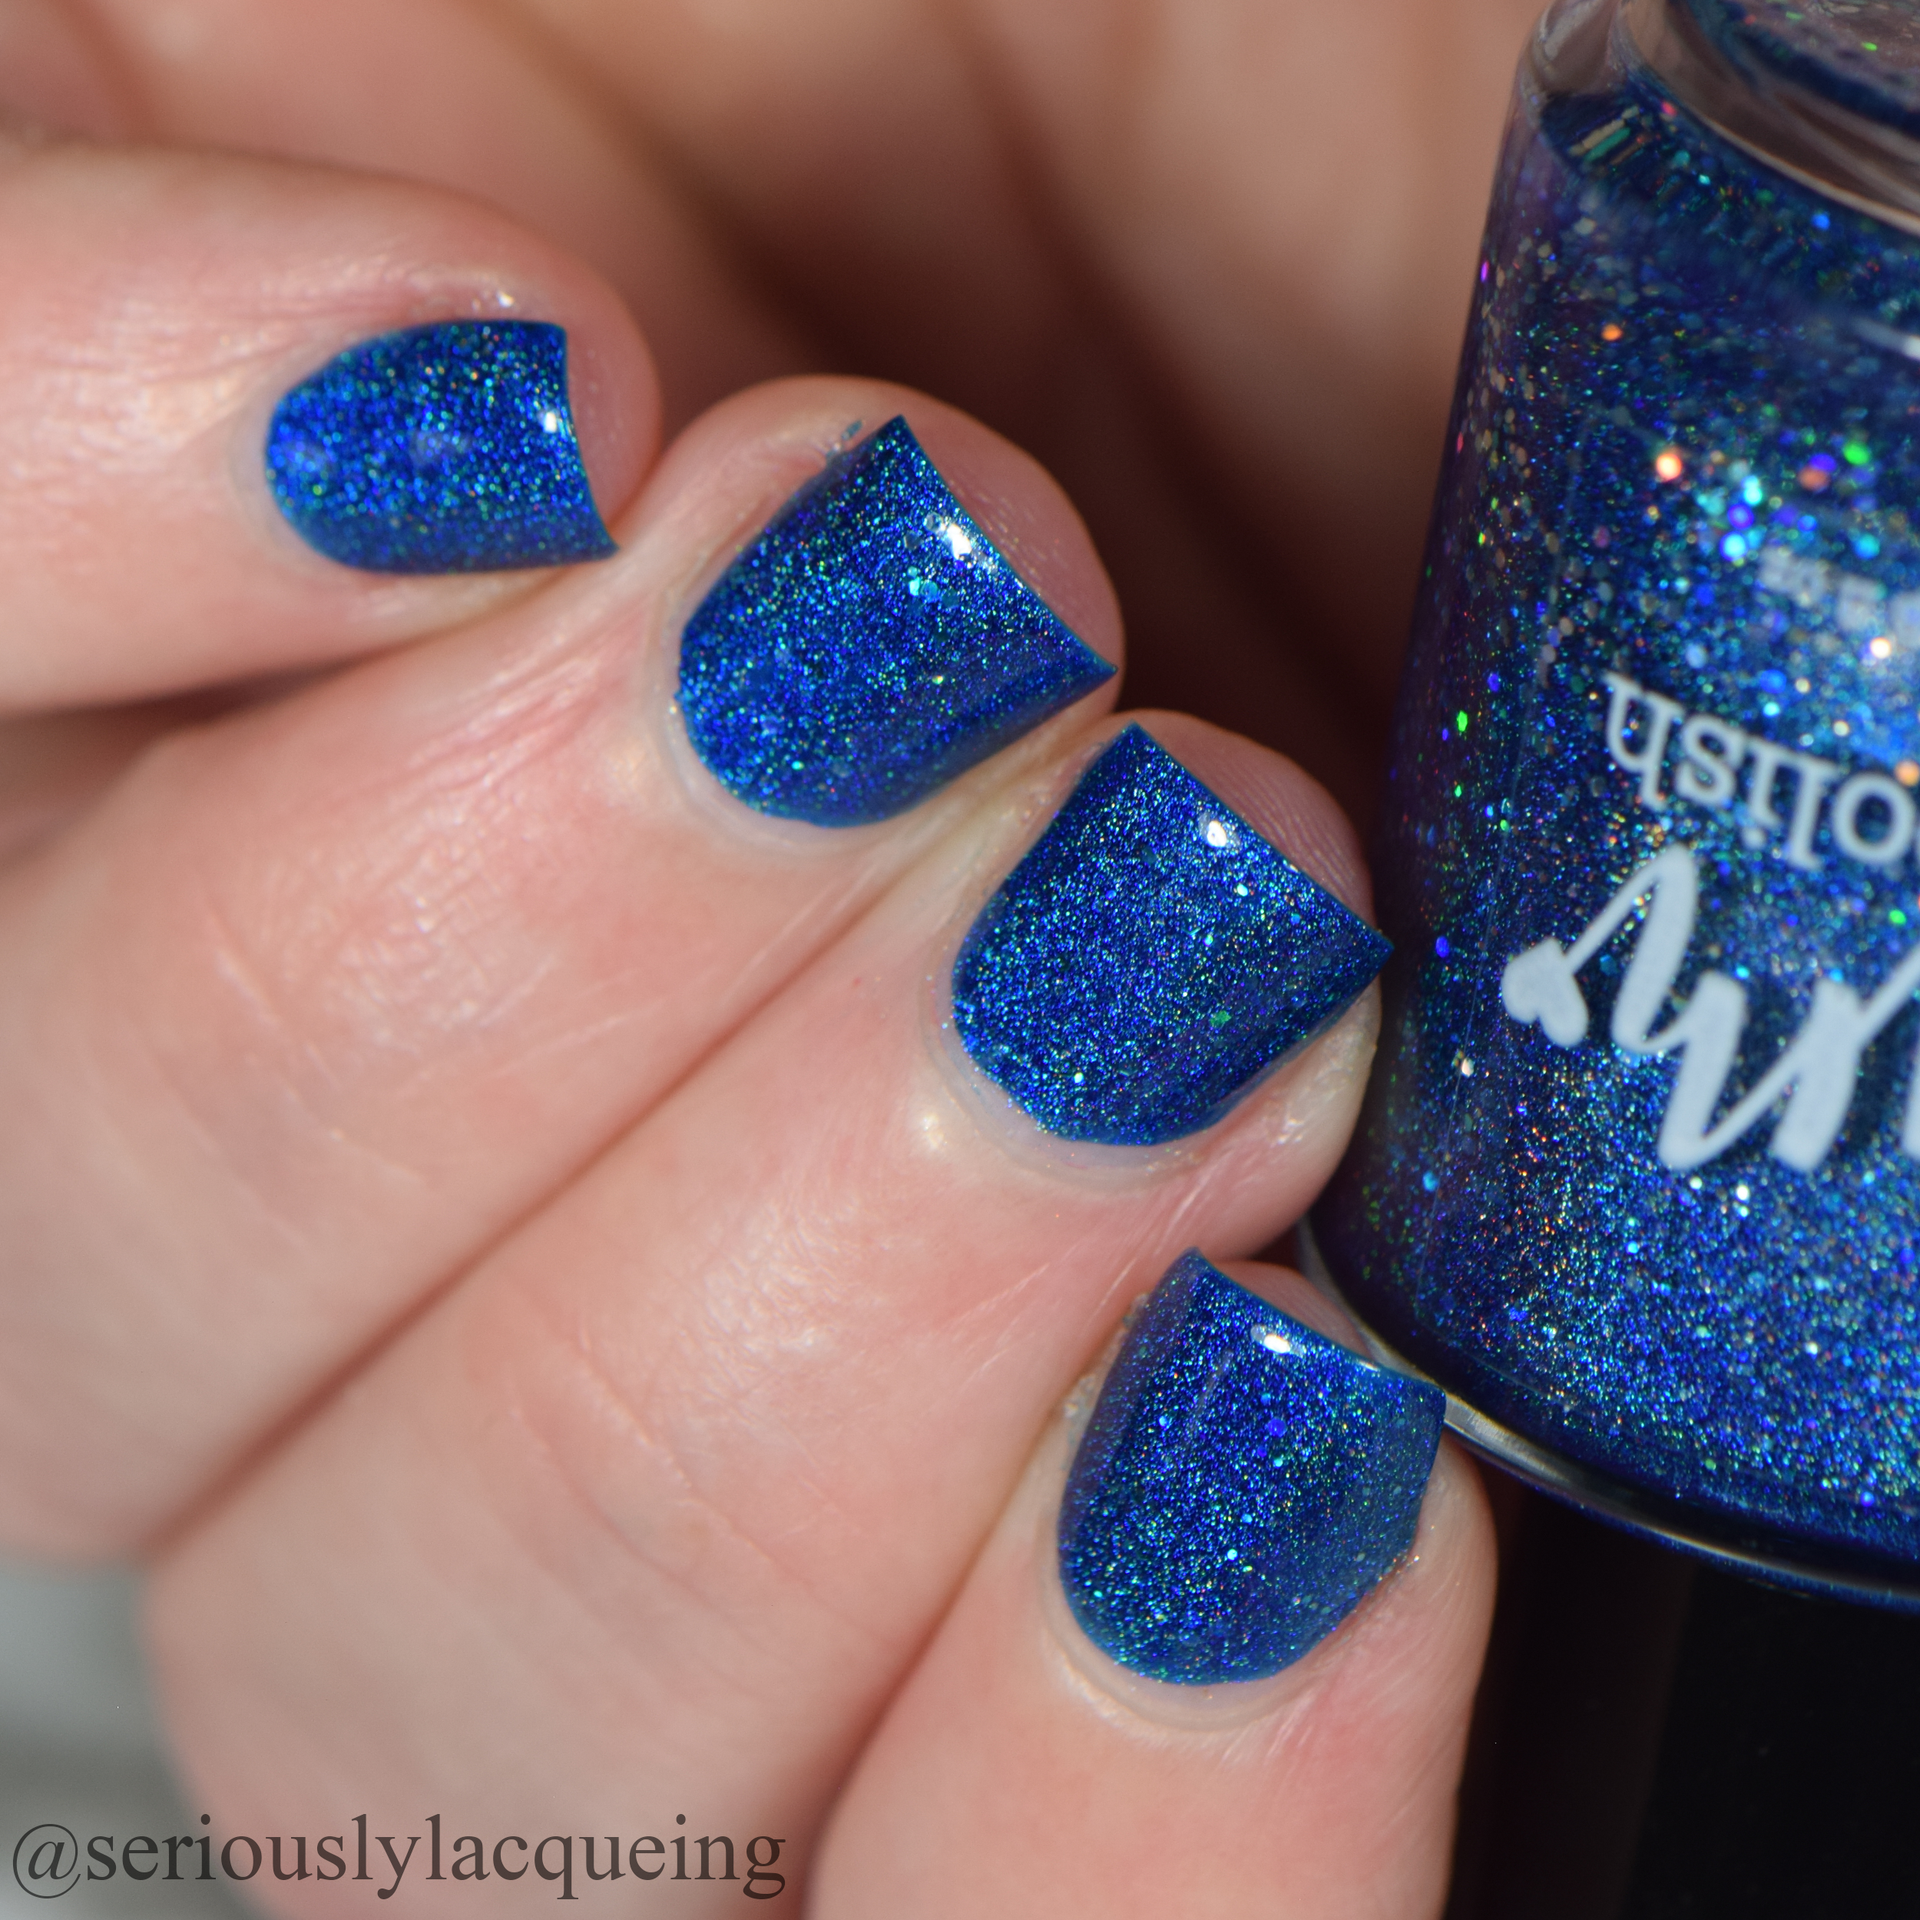 My Friend - Deep Blue Linear Holographic Polish - Remembering Robert  Collection